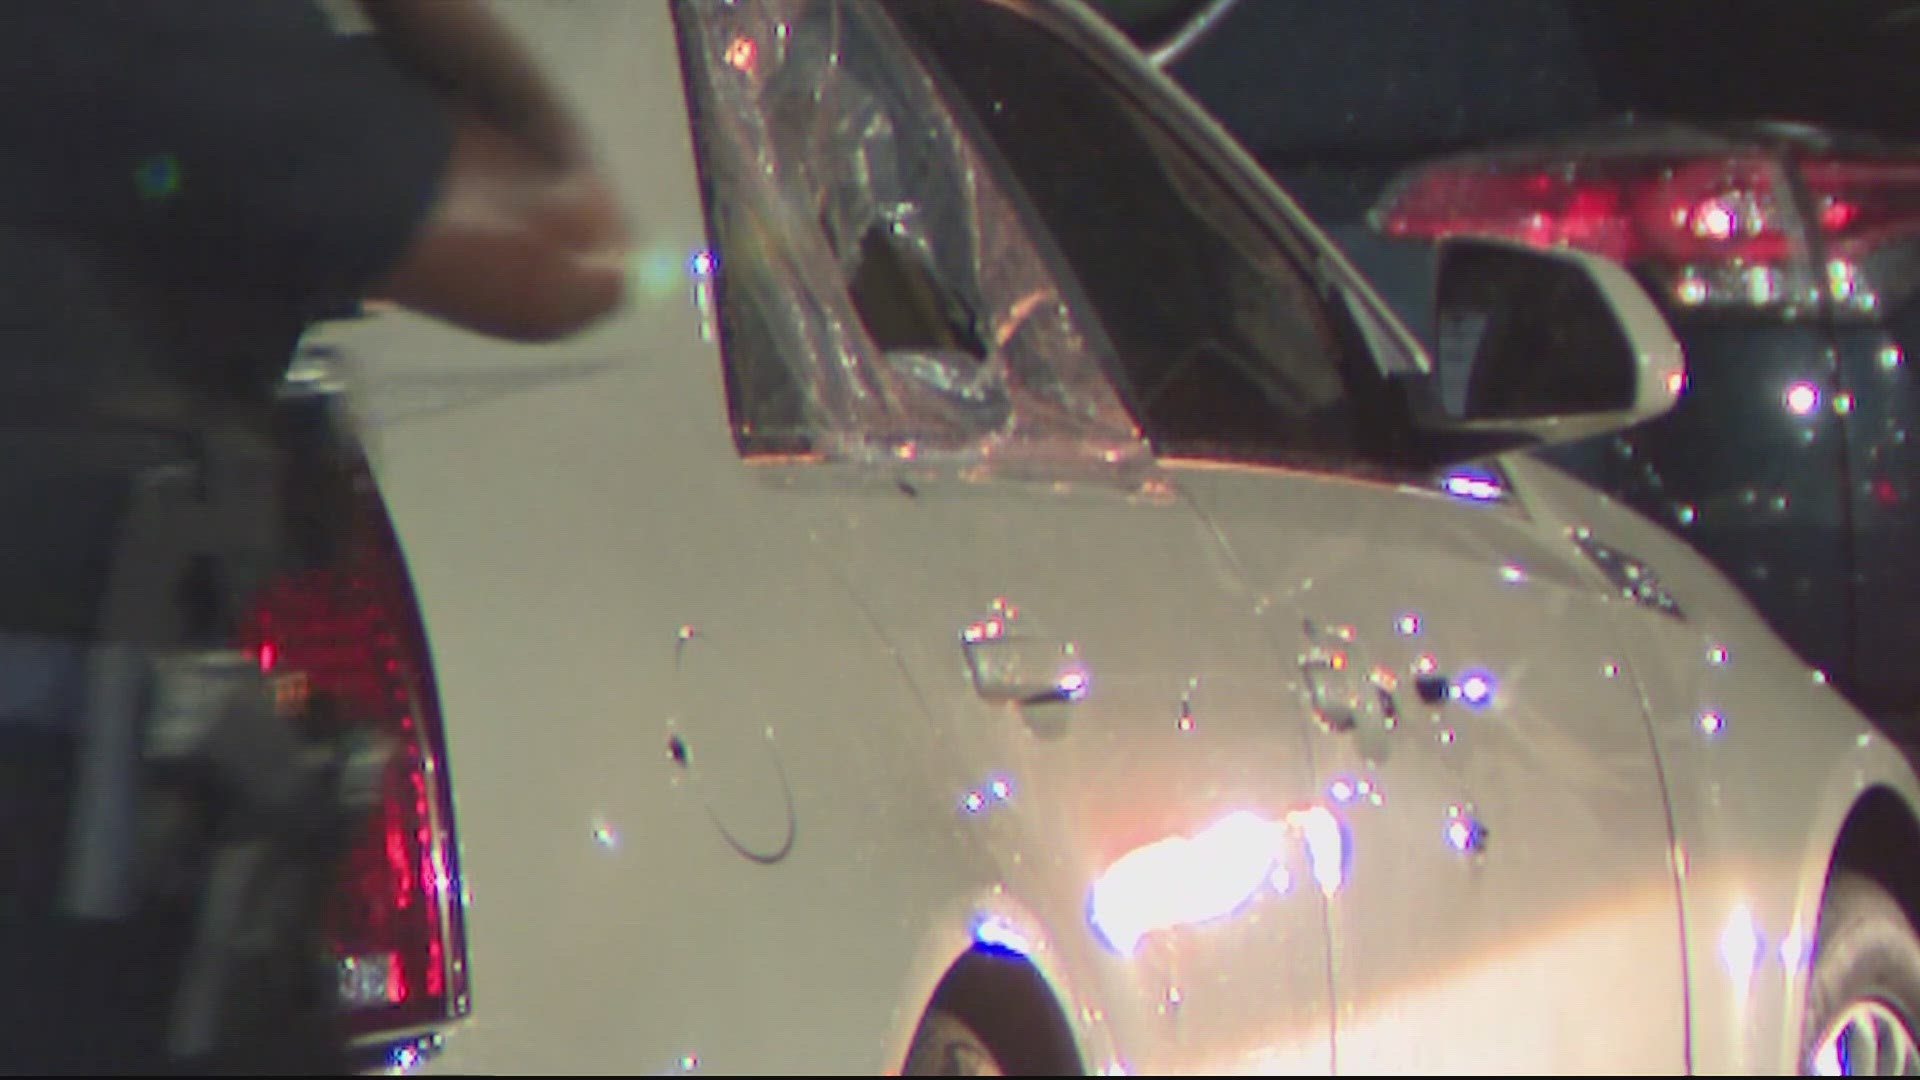 One of the victims were found inside of a vehicle suffering from gunshot wounds.